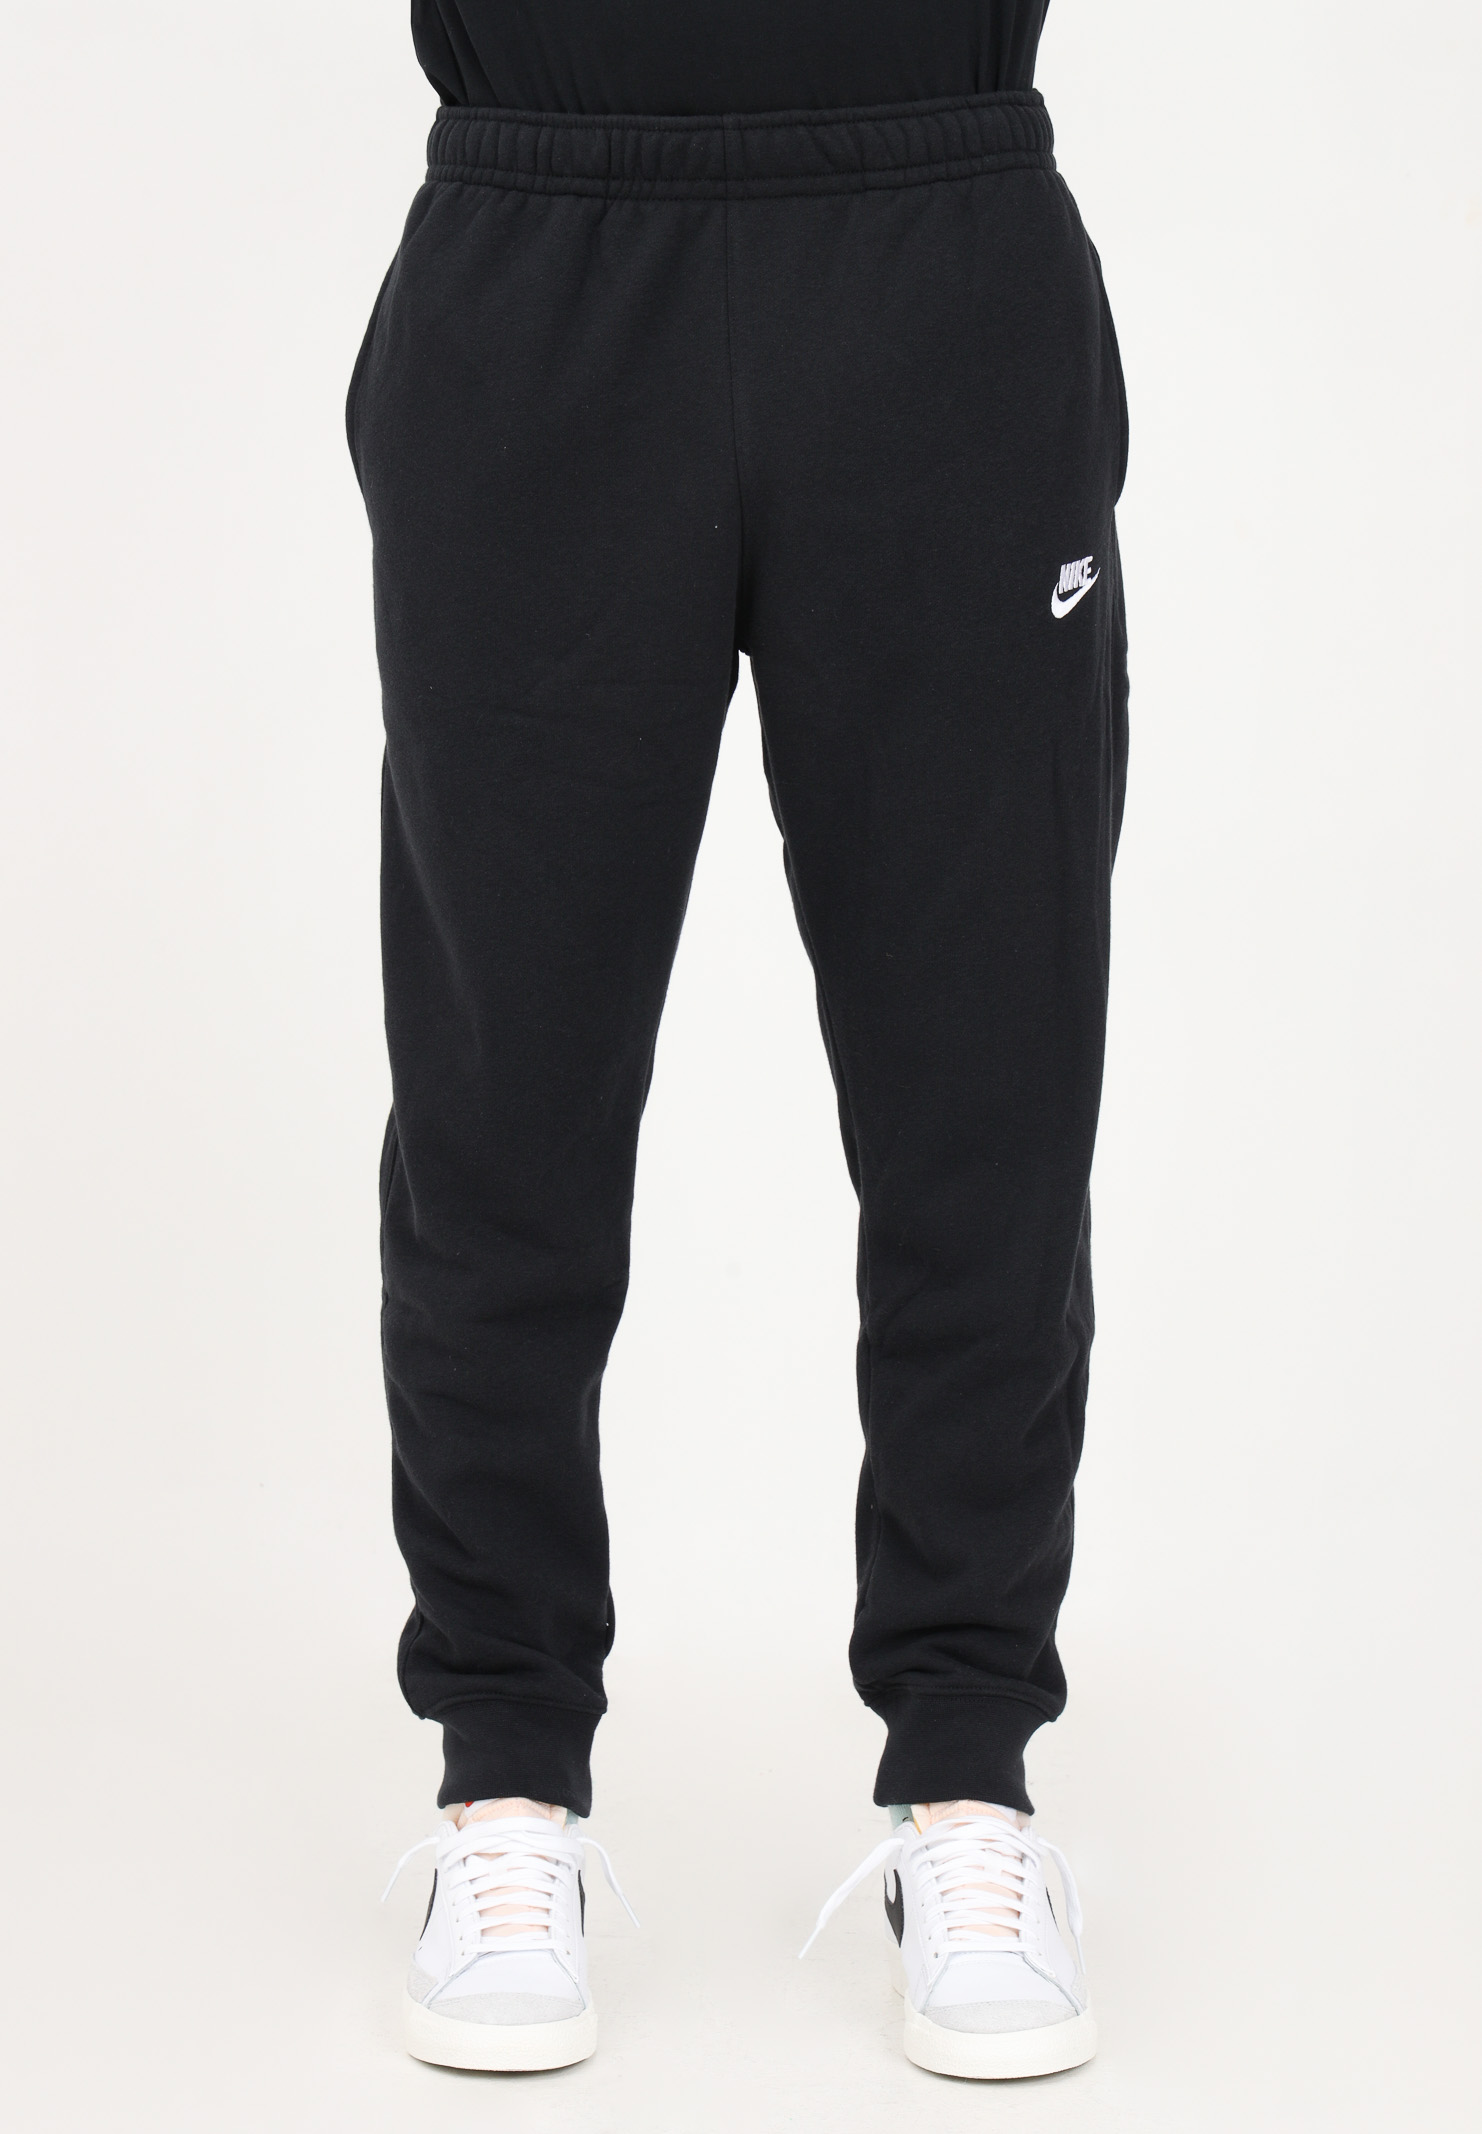 Black sports trousers for men with logo embroidery - NIKE - Pavidas